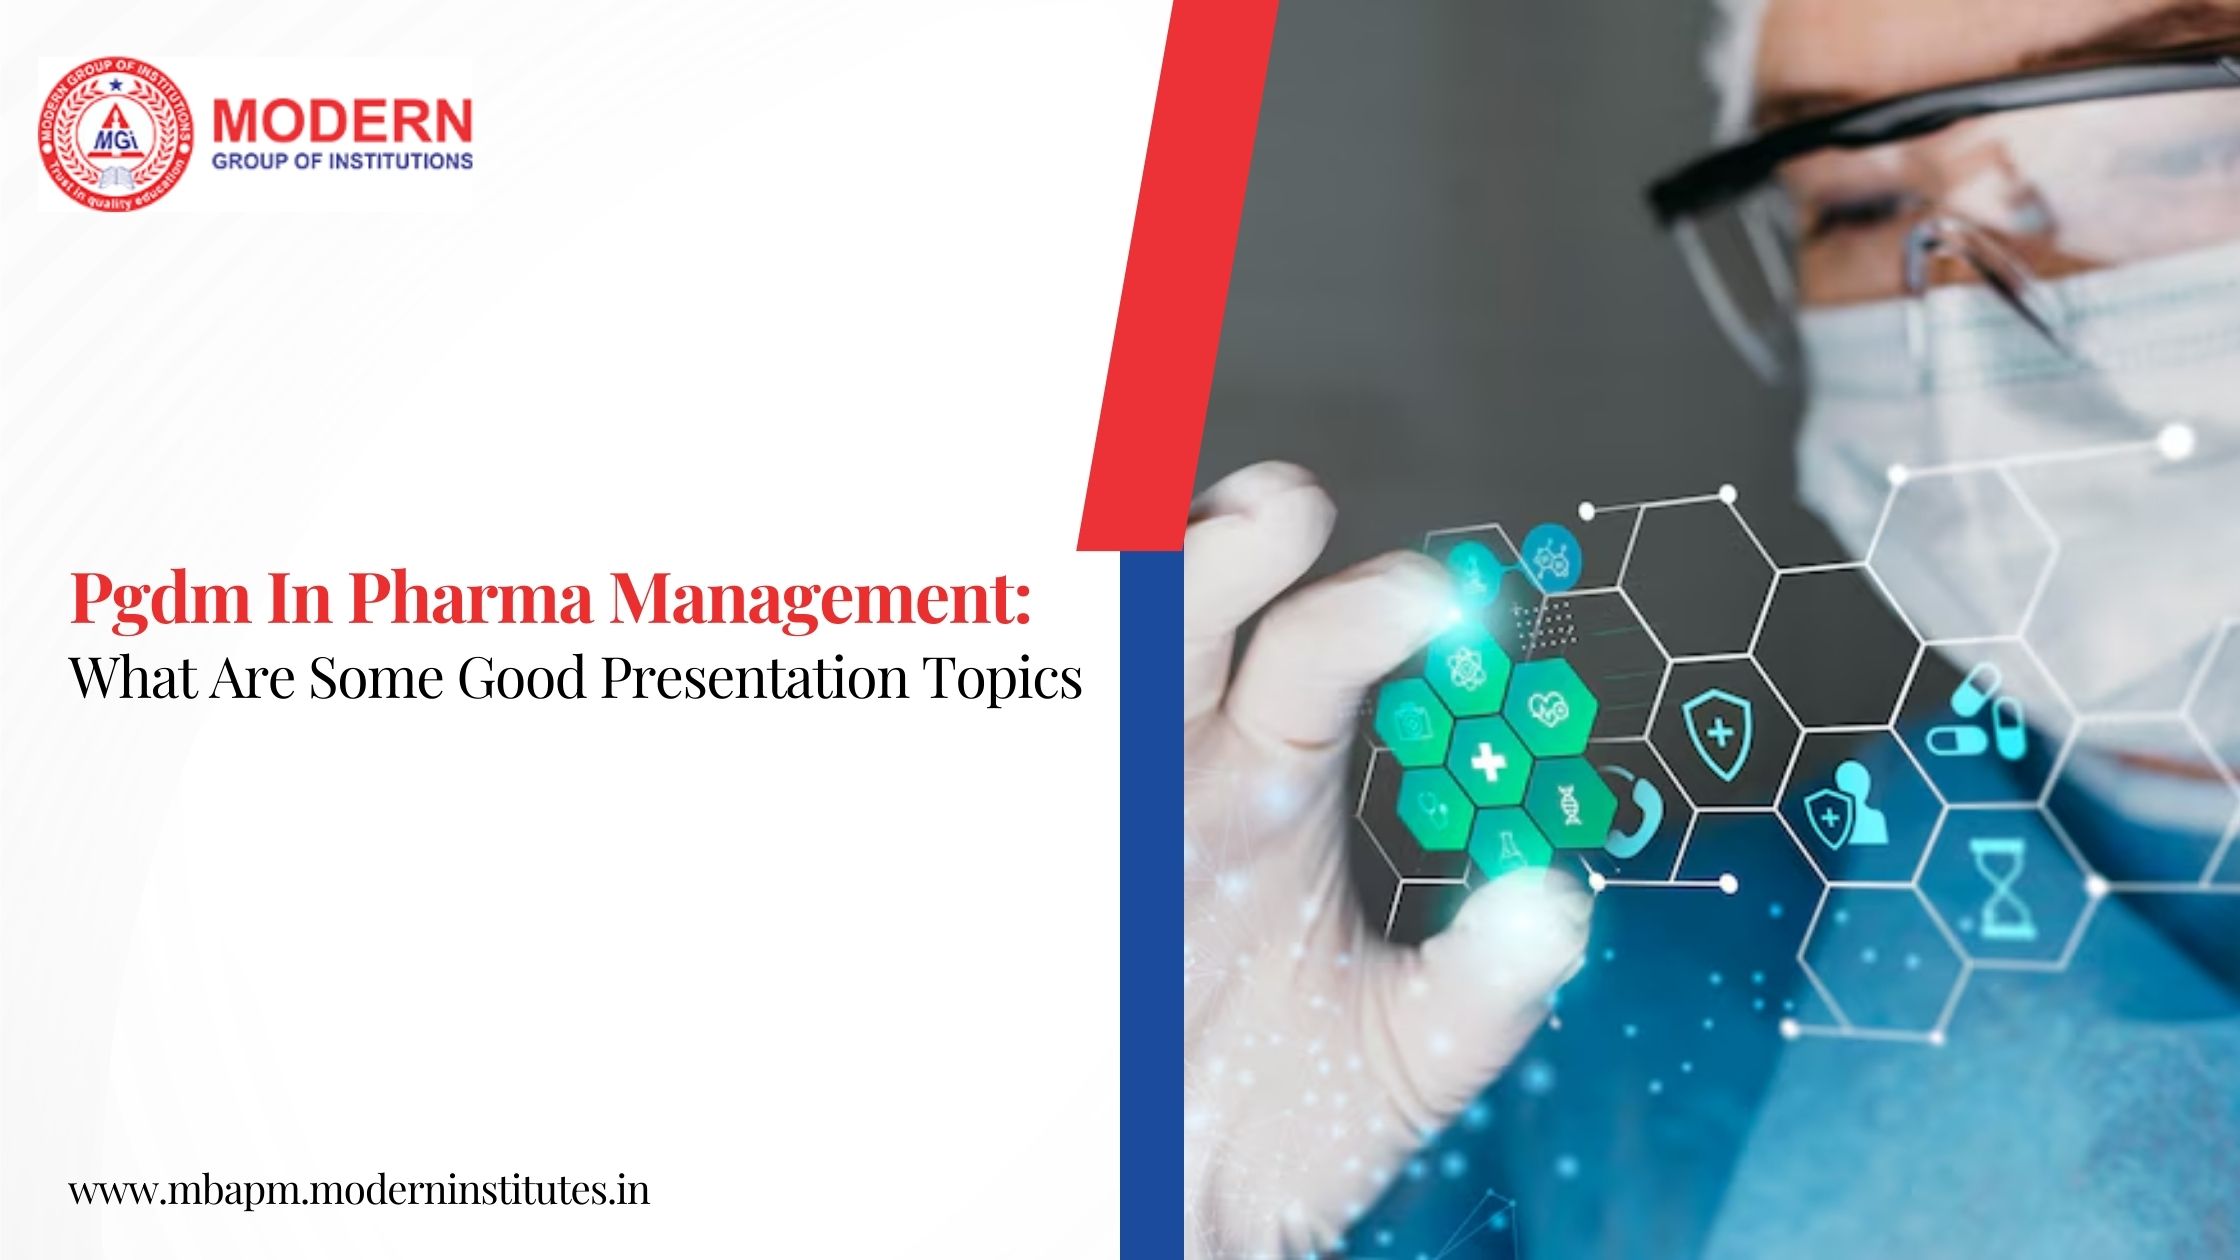 Pgdm In Pharma Management: What Are Some Good Presentation Topics